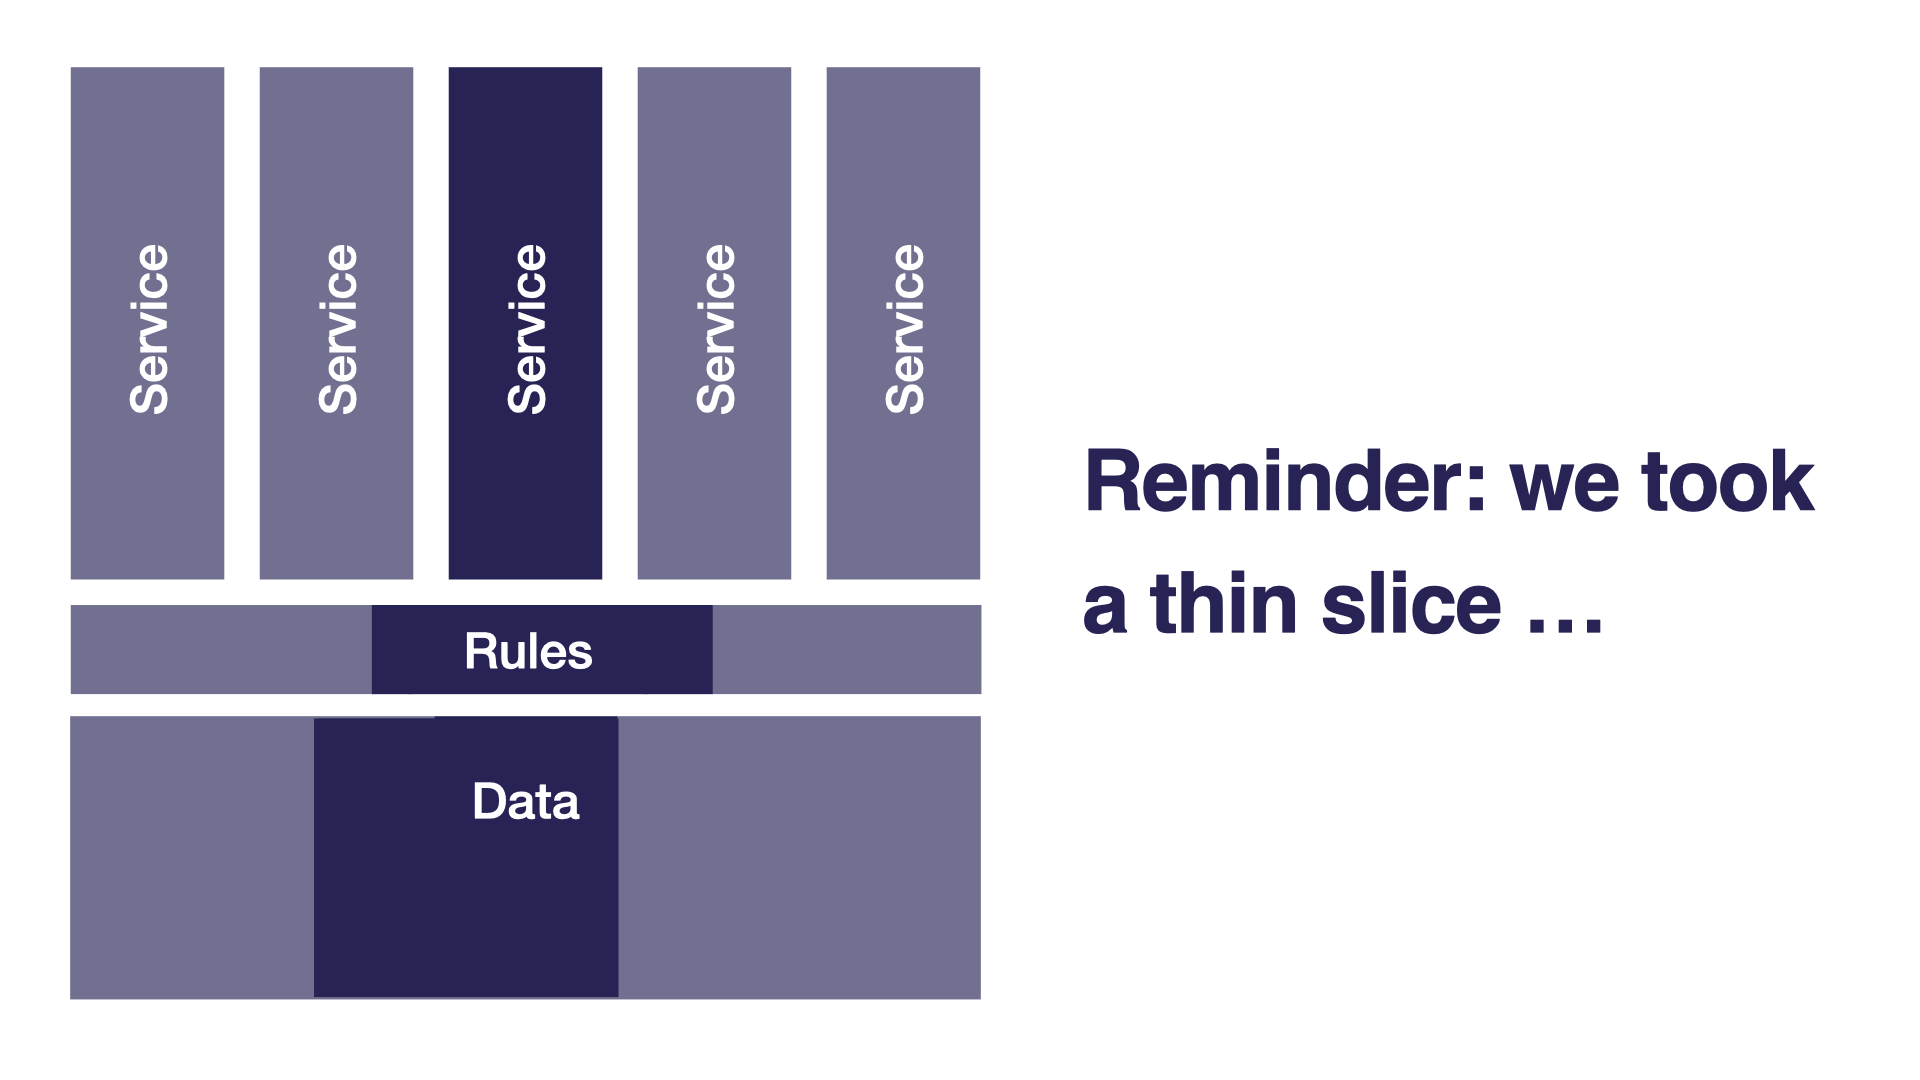 A slide with similar image to previous slide, but with a single service and ‘rules’ and ‘data’ platforms selected, and the text: Reminder: we took a thin slice